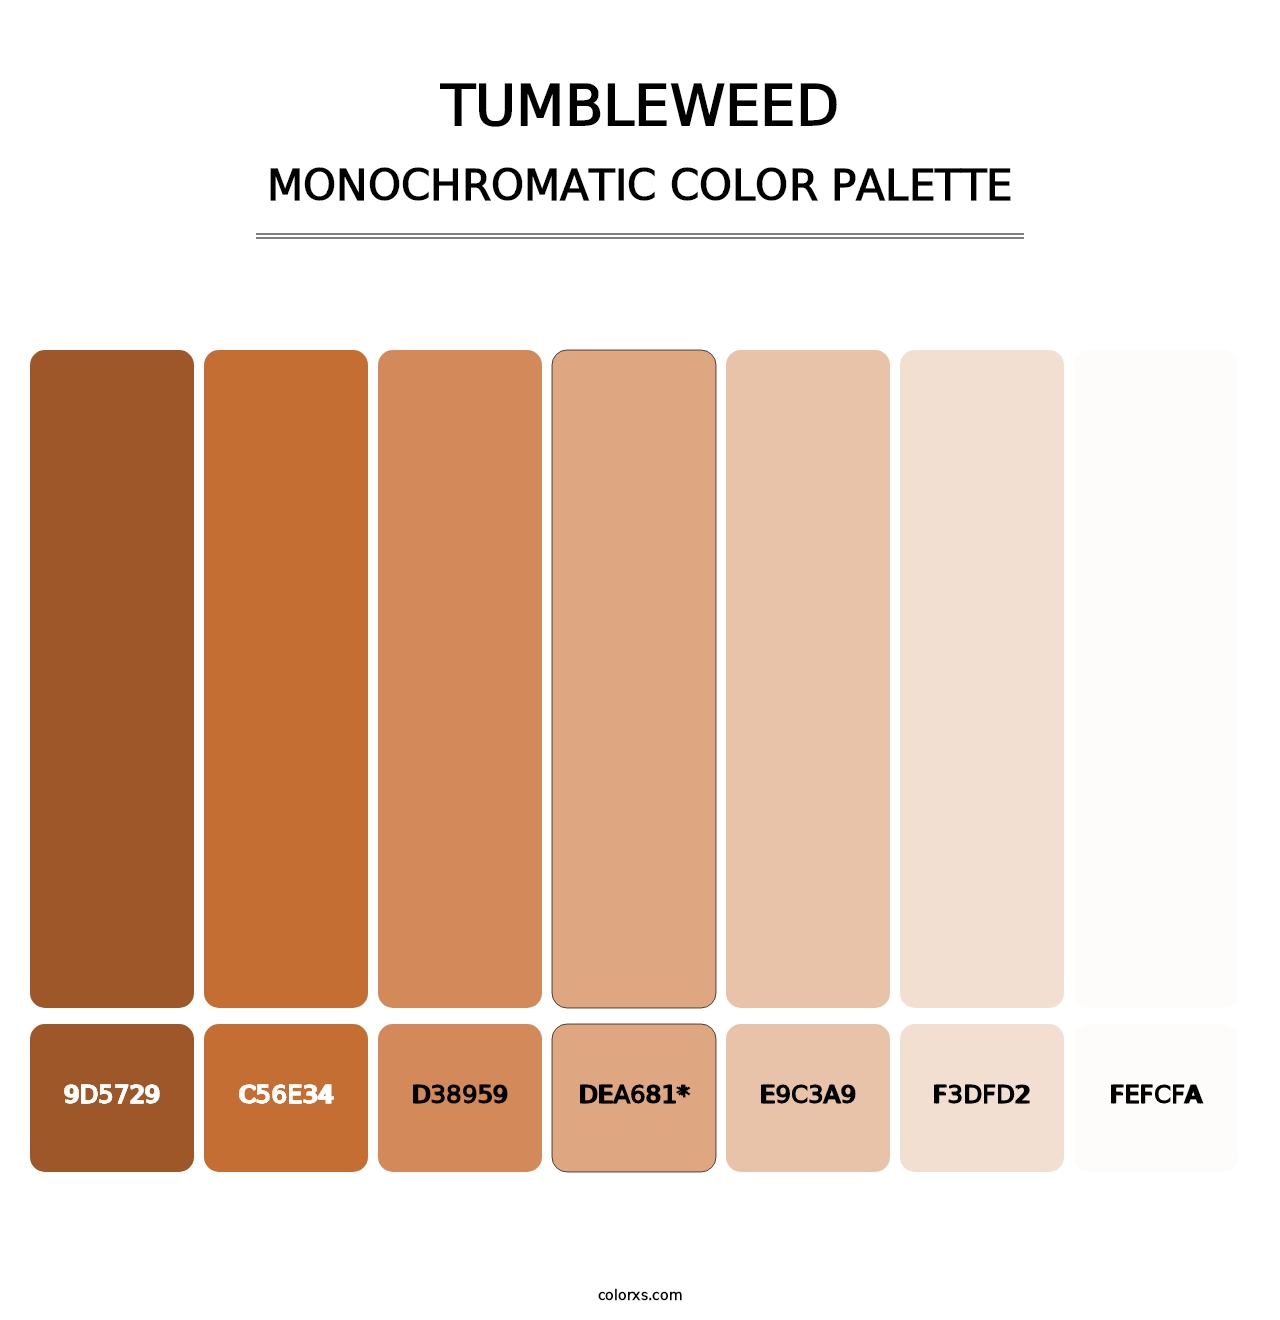 Tumbleweed - Monochromatic Color Palette